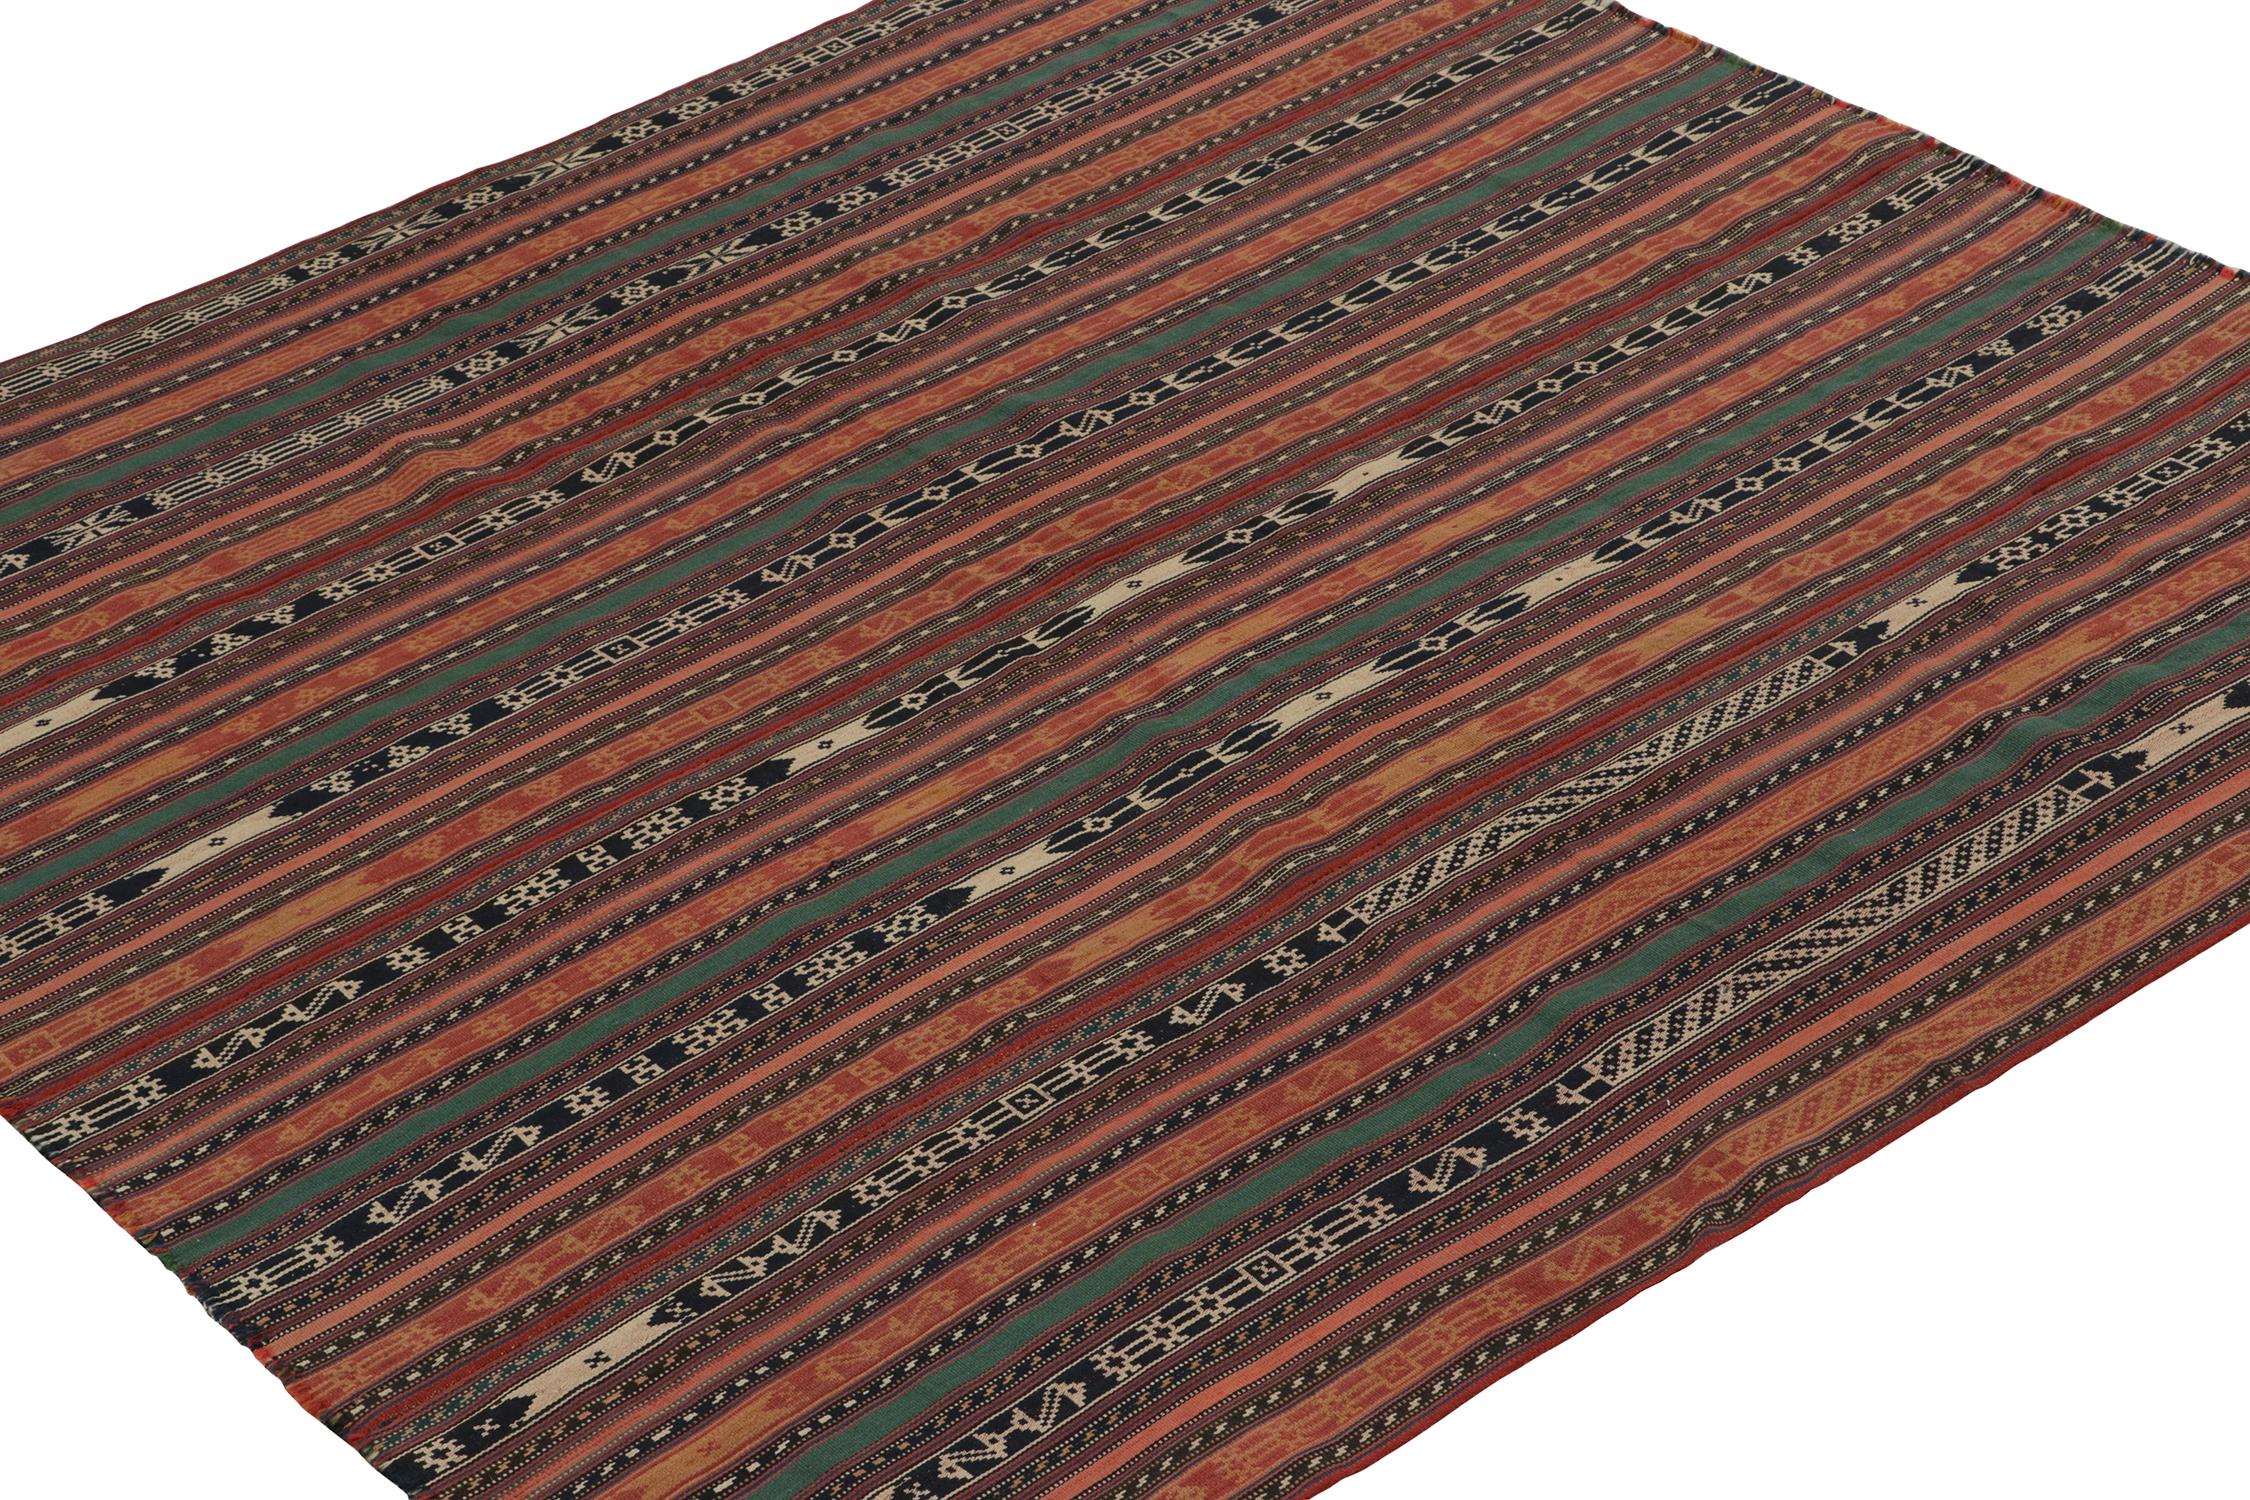 This vintage 5x7 Persian kilim is a Jajim style curation, handwoven in wool circa 1950-1960. 

Further on the Design:

This design prefers red, forest green, gold, black and off-white in a gorgeous yet simple play of polychromatic stripes. Its